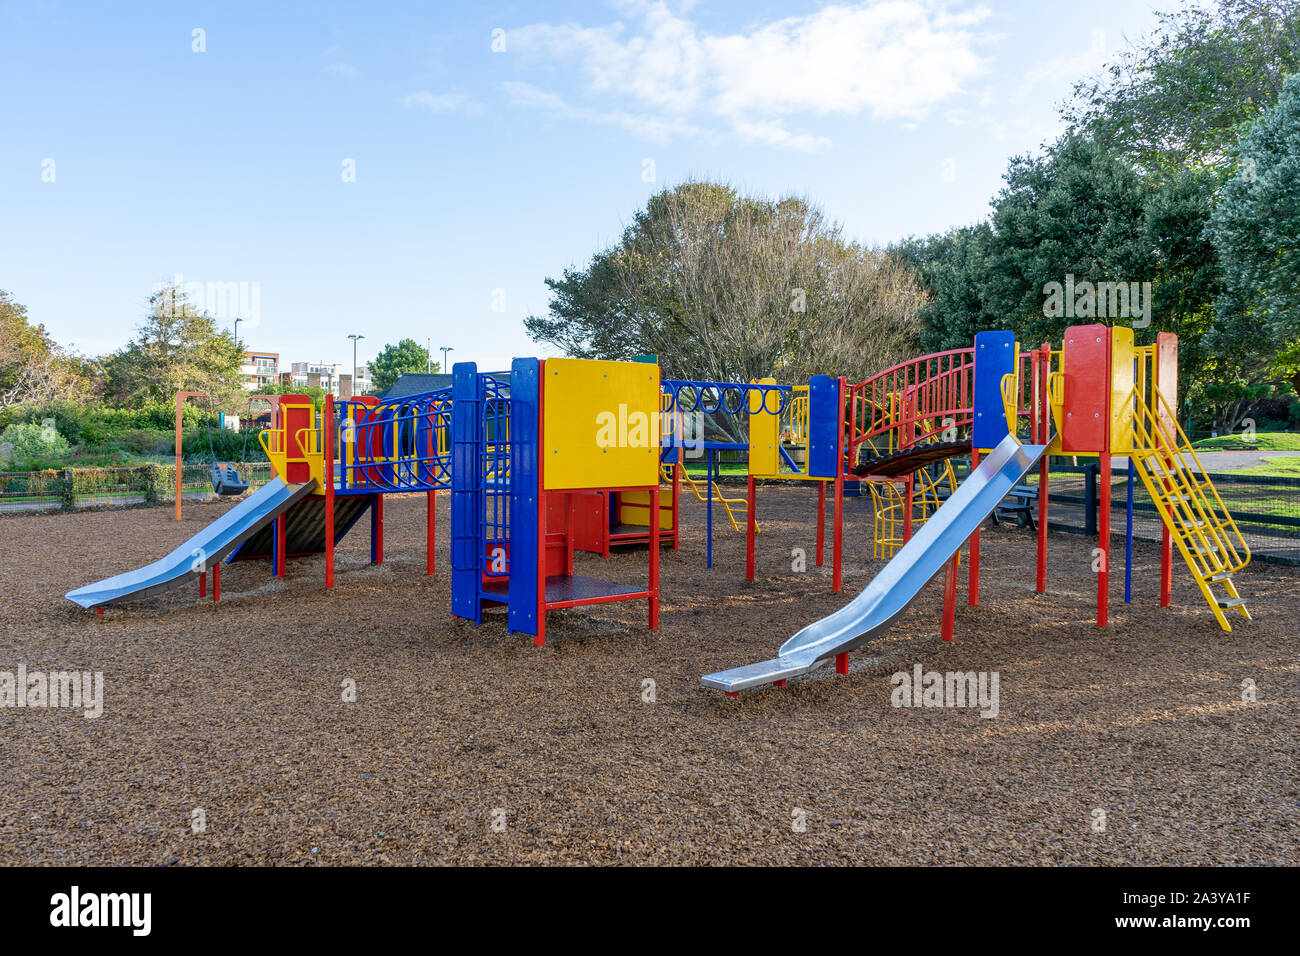 A colourful children's climbing frame with metal slides in a a children's park Stock Photo